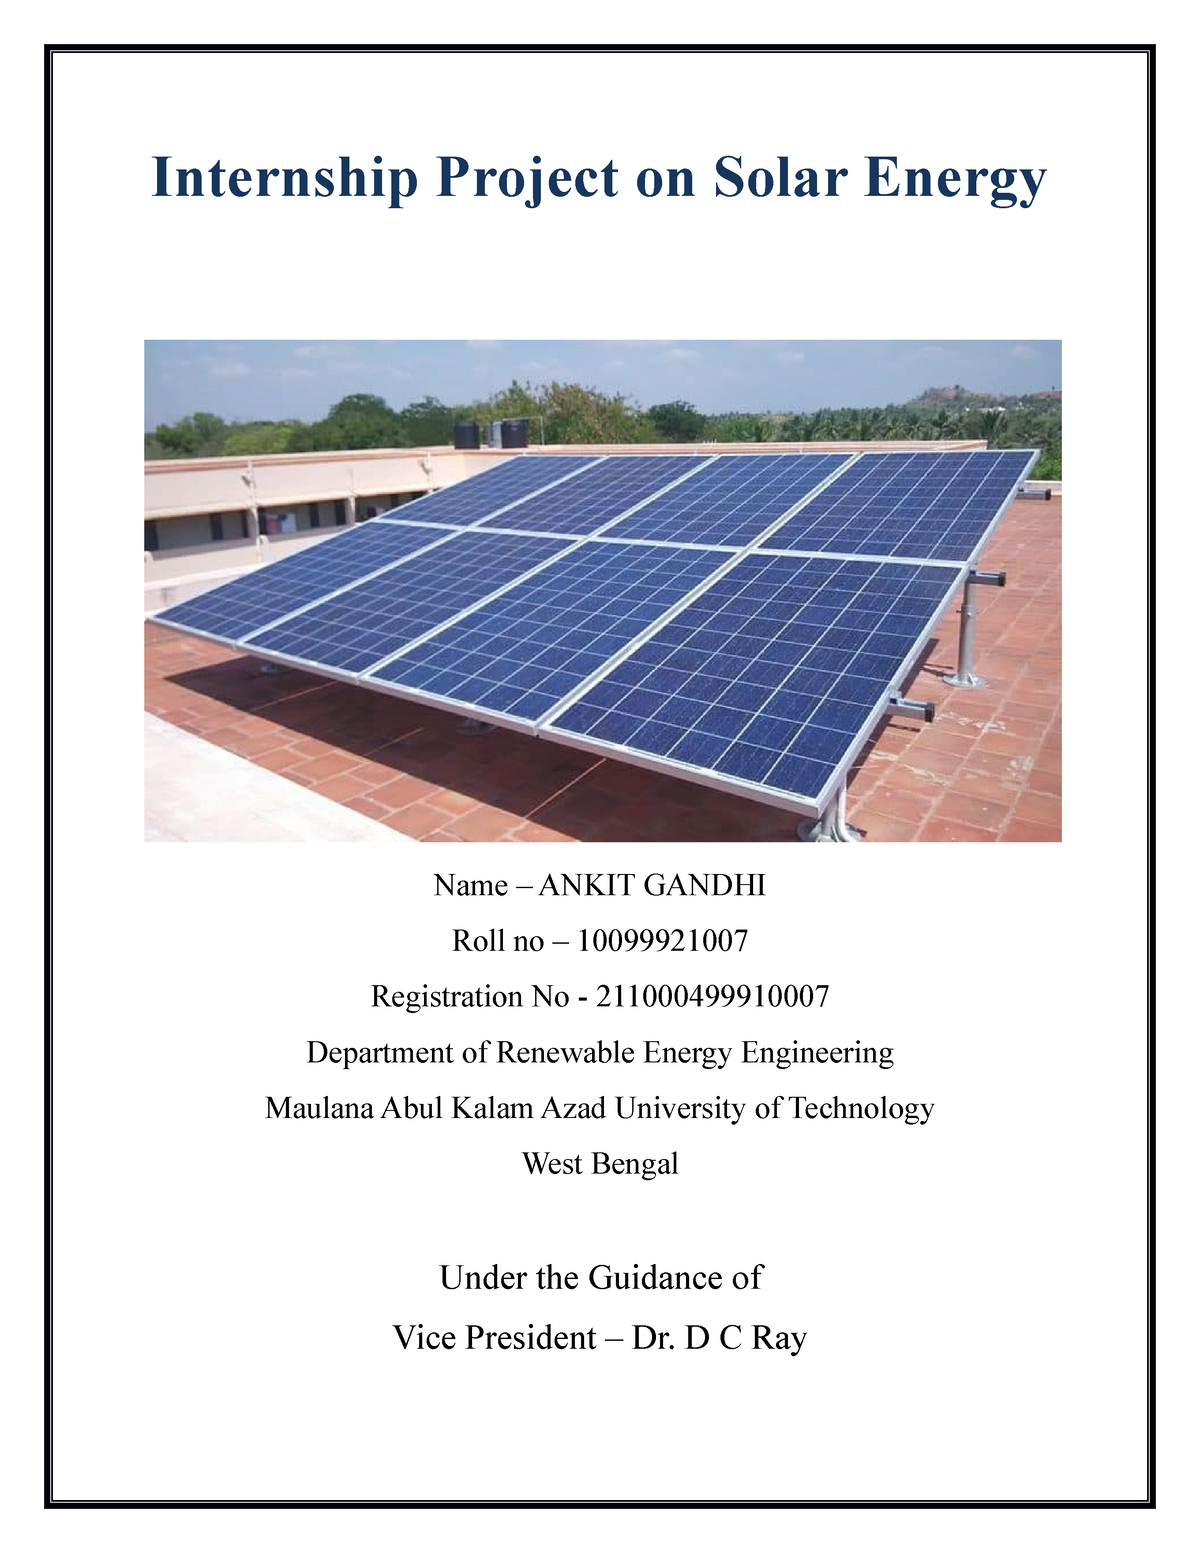 research project on solar energy